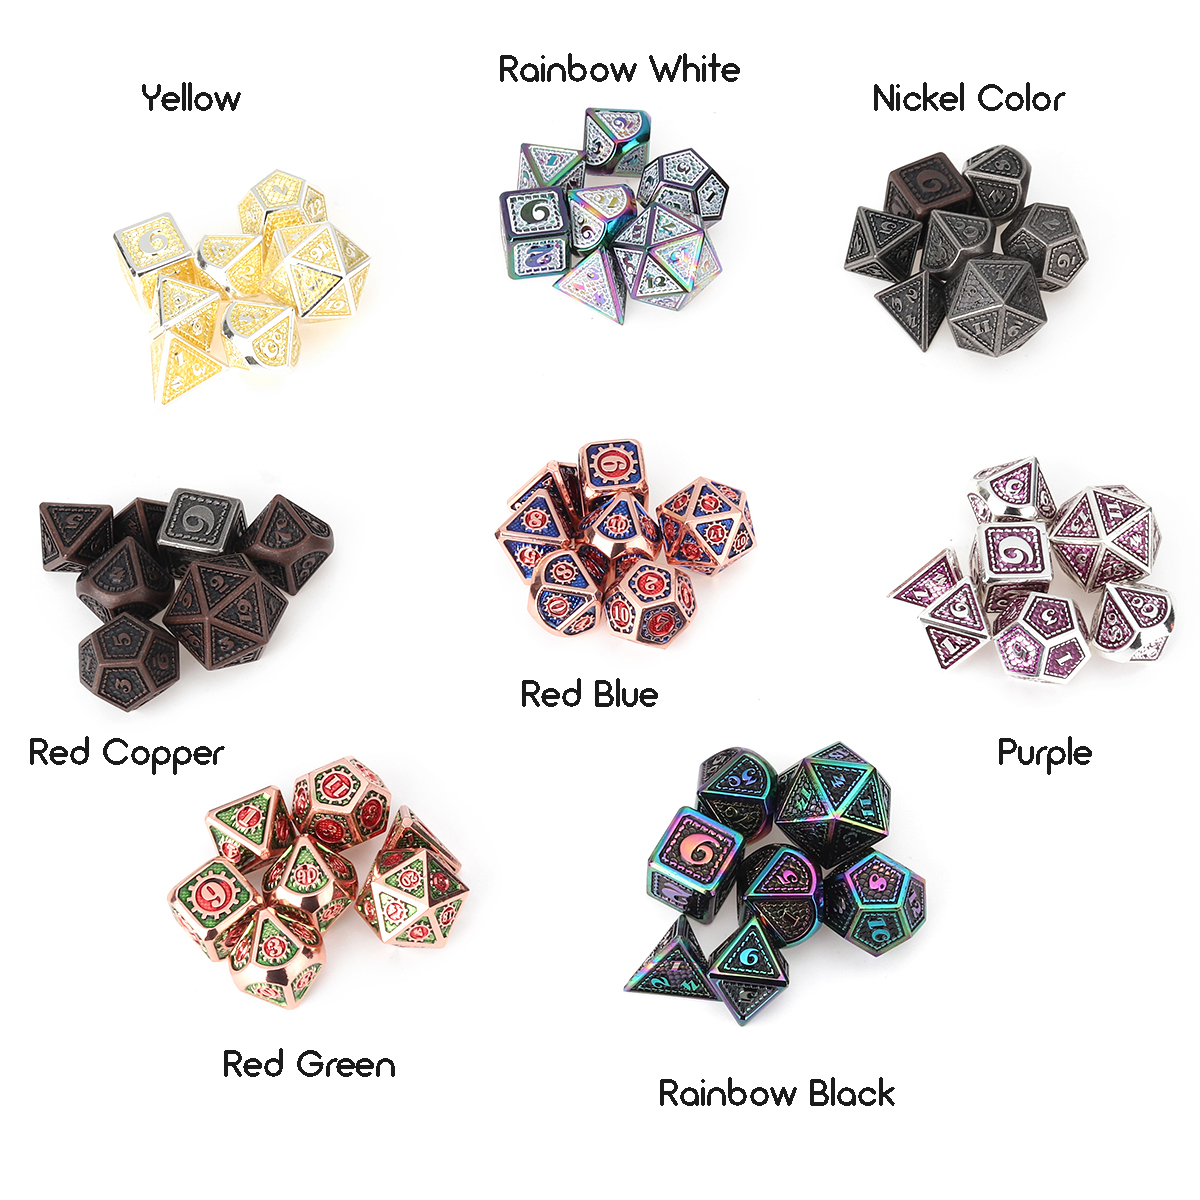 Beutiful-Color-Metal-Polyhedral-Dice-Multi-side-Dice-Set-For-DND-RPG-MTG-Role-Playing-Board-Game-Wit-1716609-5